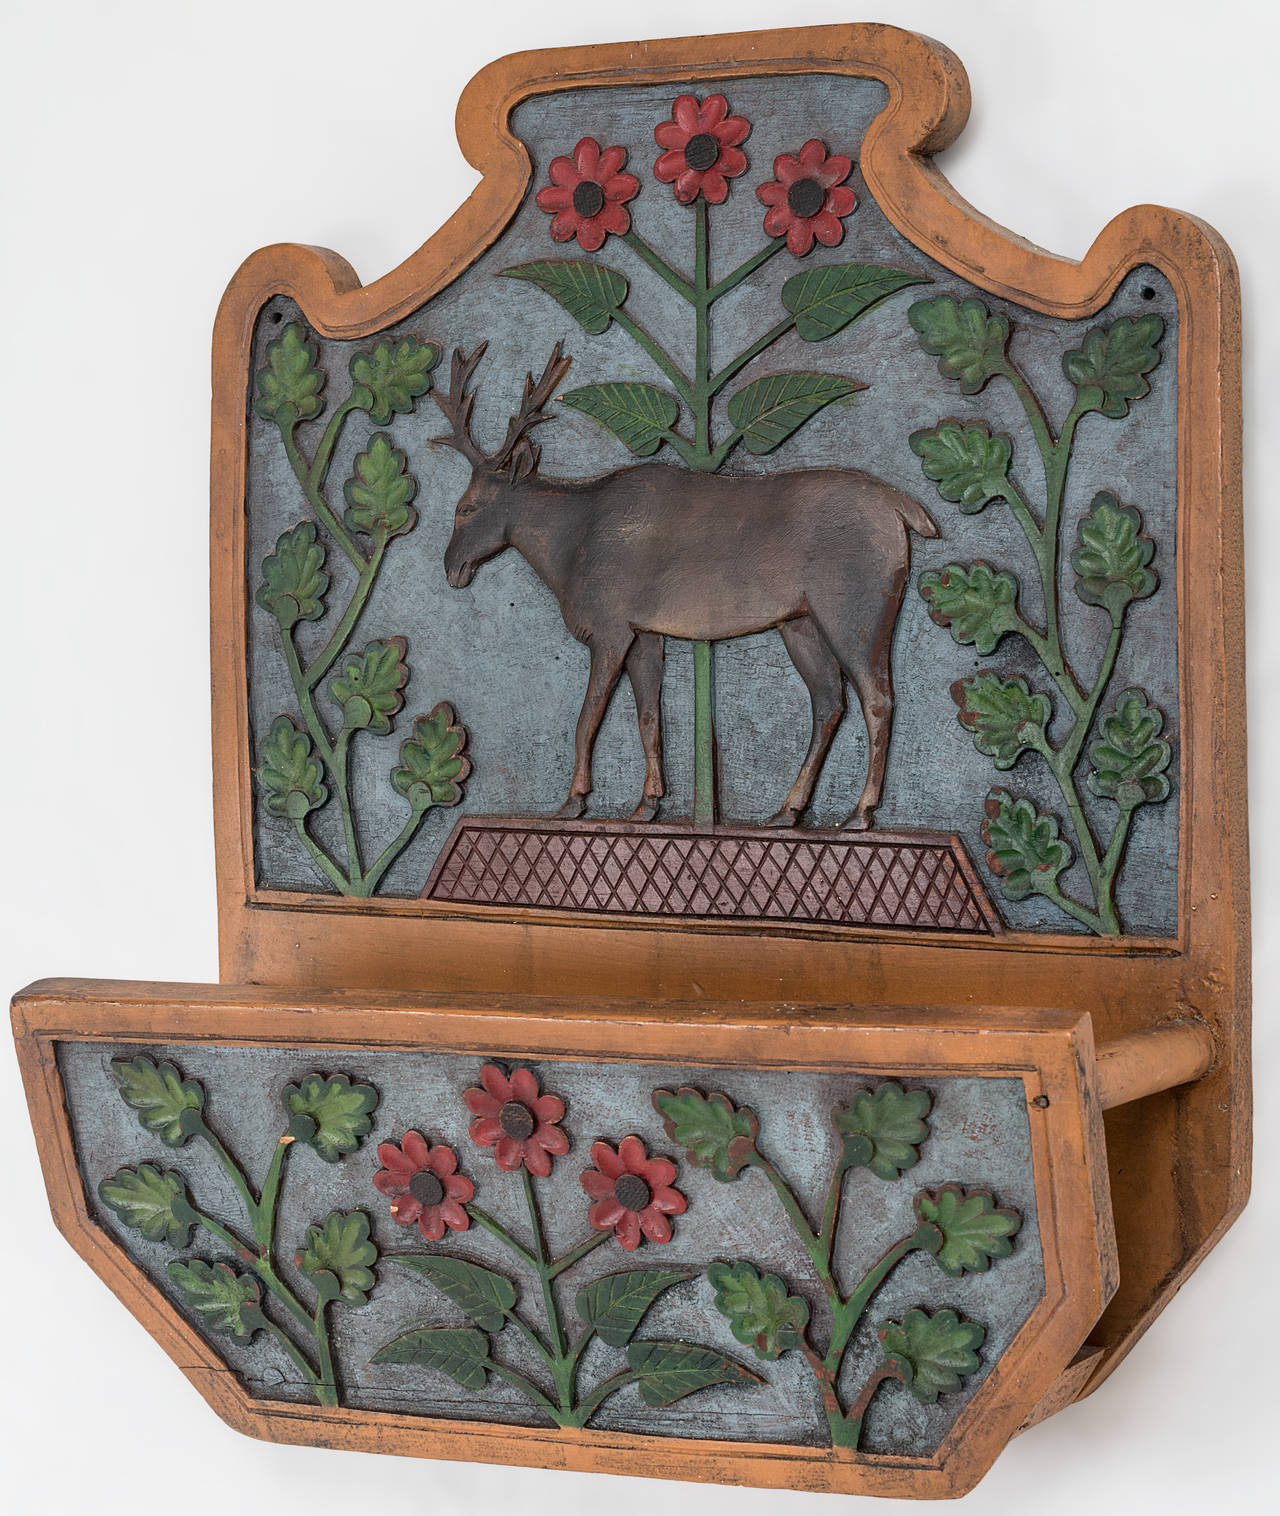 Moose relief carved wall pocket with original paint and shaped backboard
with floral design and blue ground color. Great piece of American Folk Art in untouched original
condition. Found in Maine,
New England, circa 1930-1940.